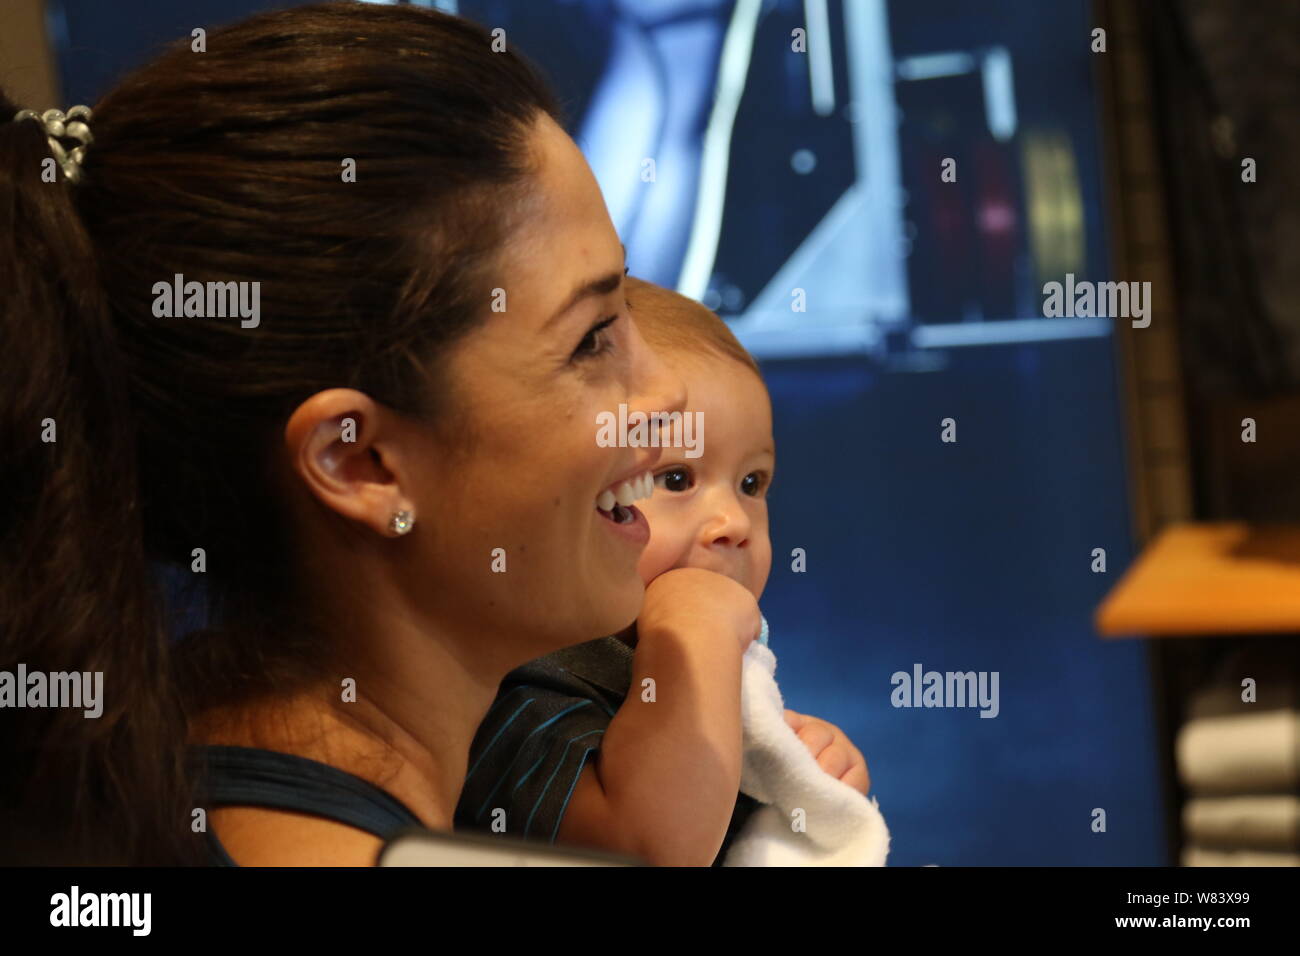 Nicole Johnson, the fiancee of American swimming star Michael Phelps, holds their son Boomer as she looks at Michael Phelps during a fan meeting at th Stock Photo